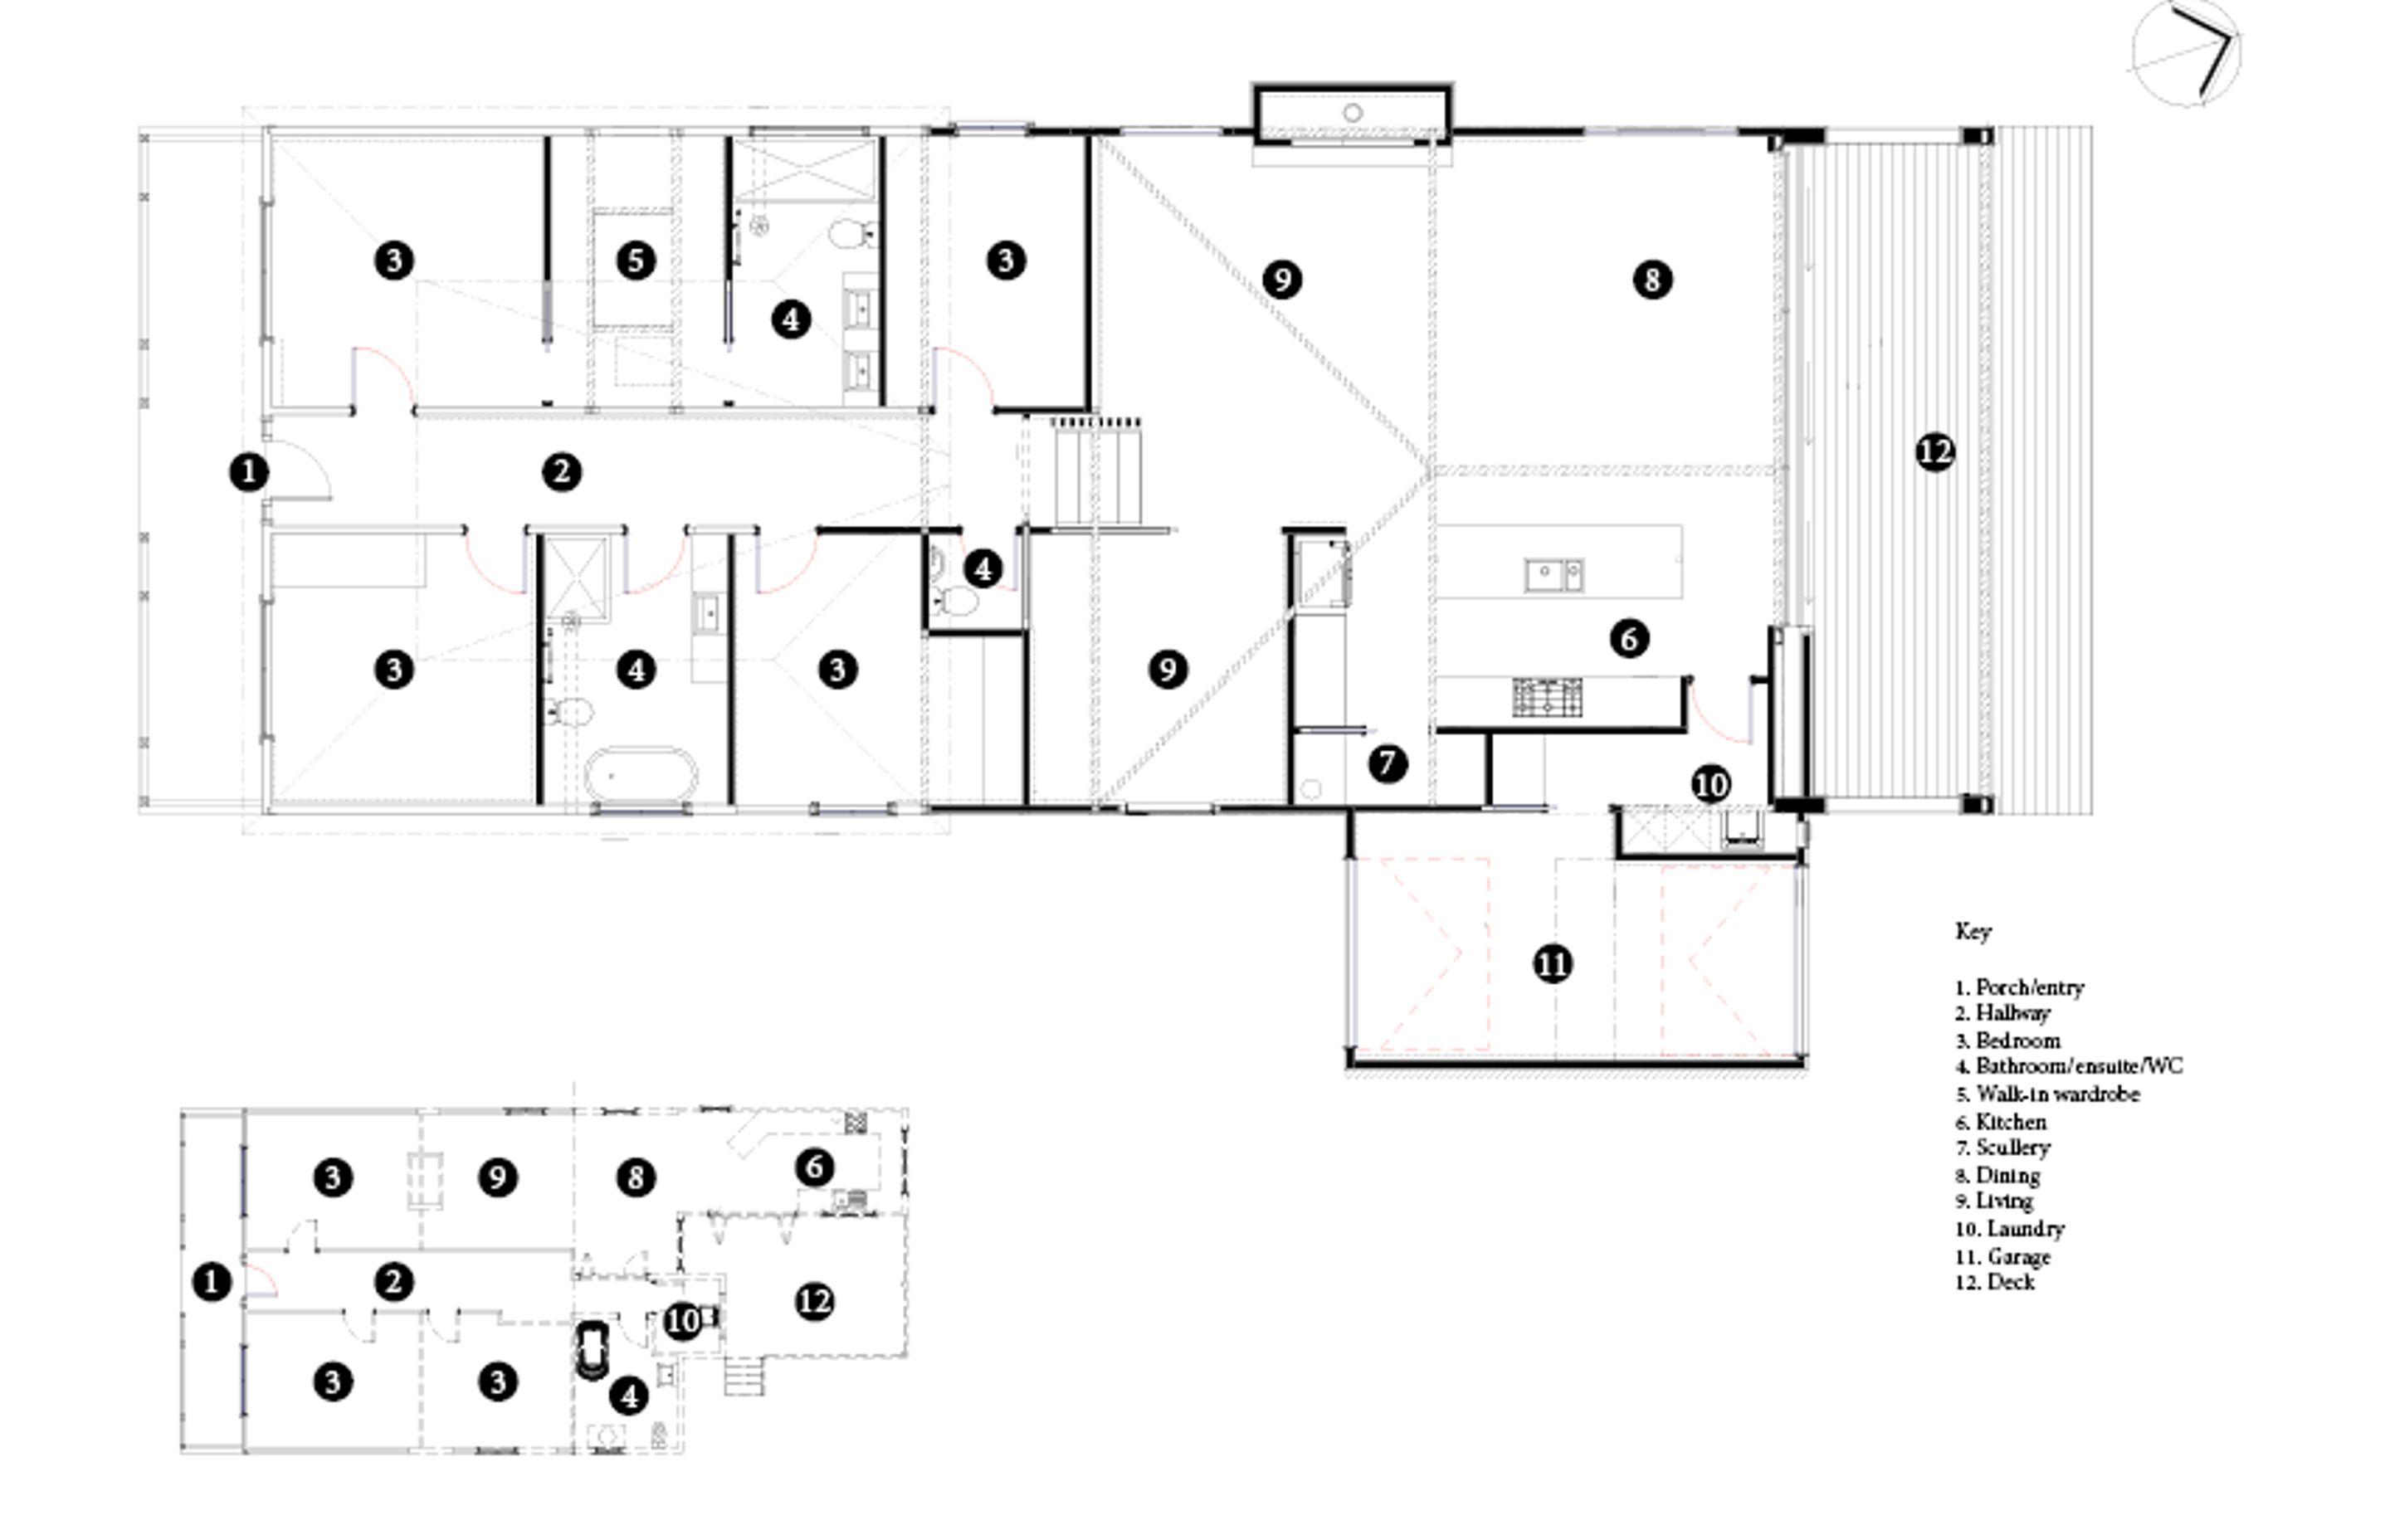 Floor plan showing the original layout (bottom left) and the post-renovation layout.